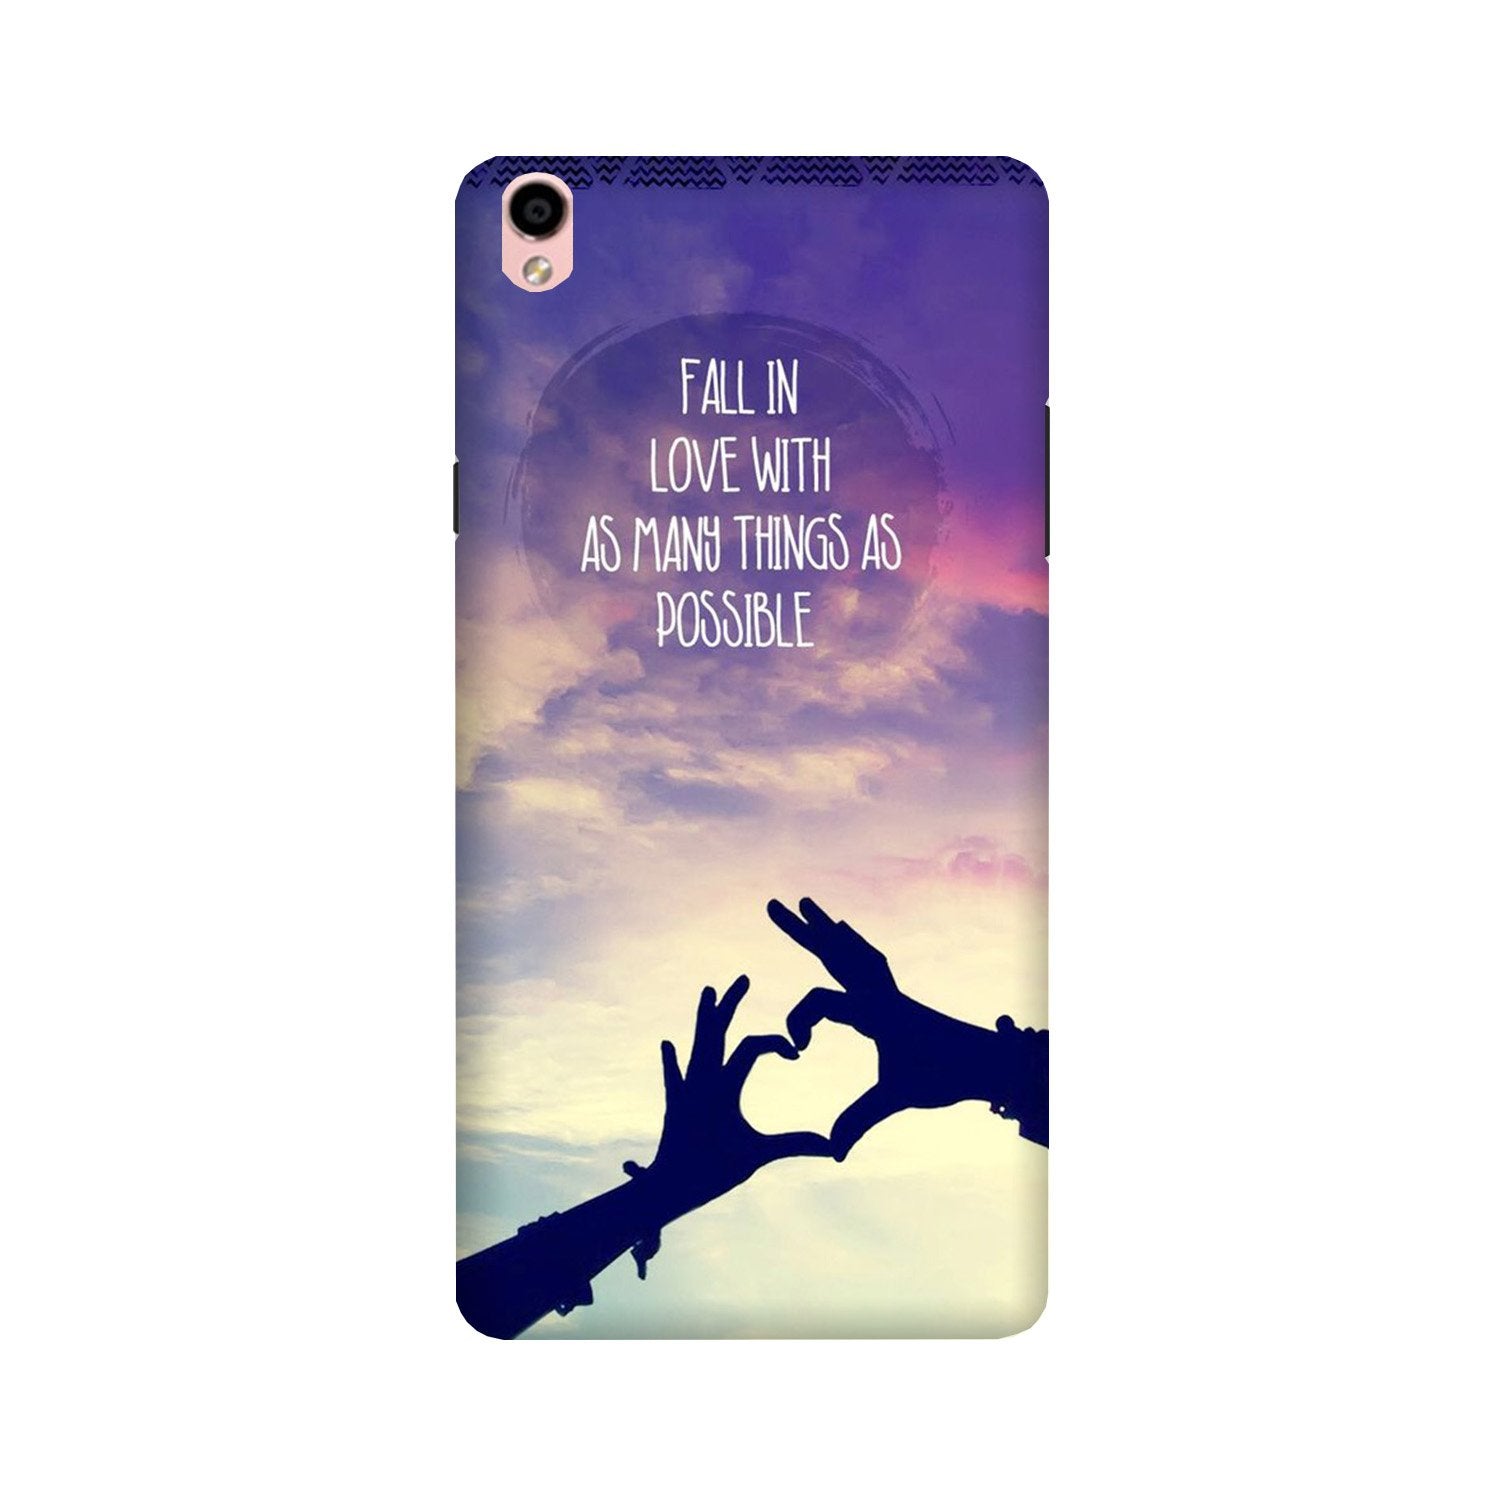 Fall in love Case for Oppo F1 Plus